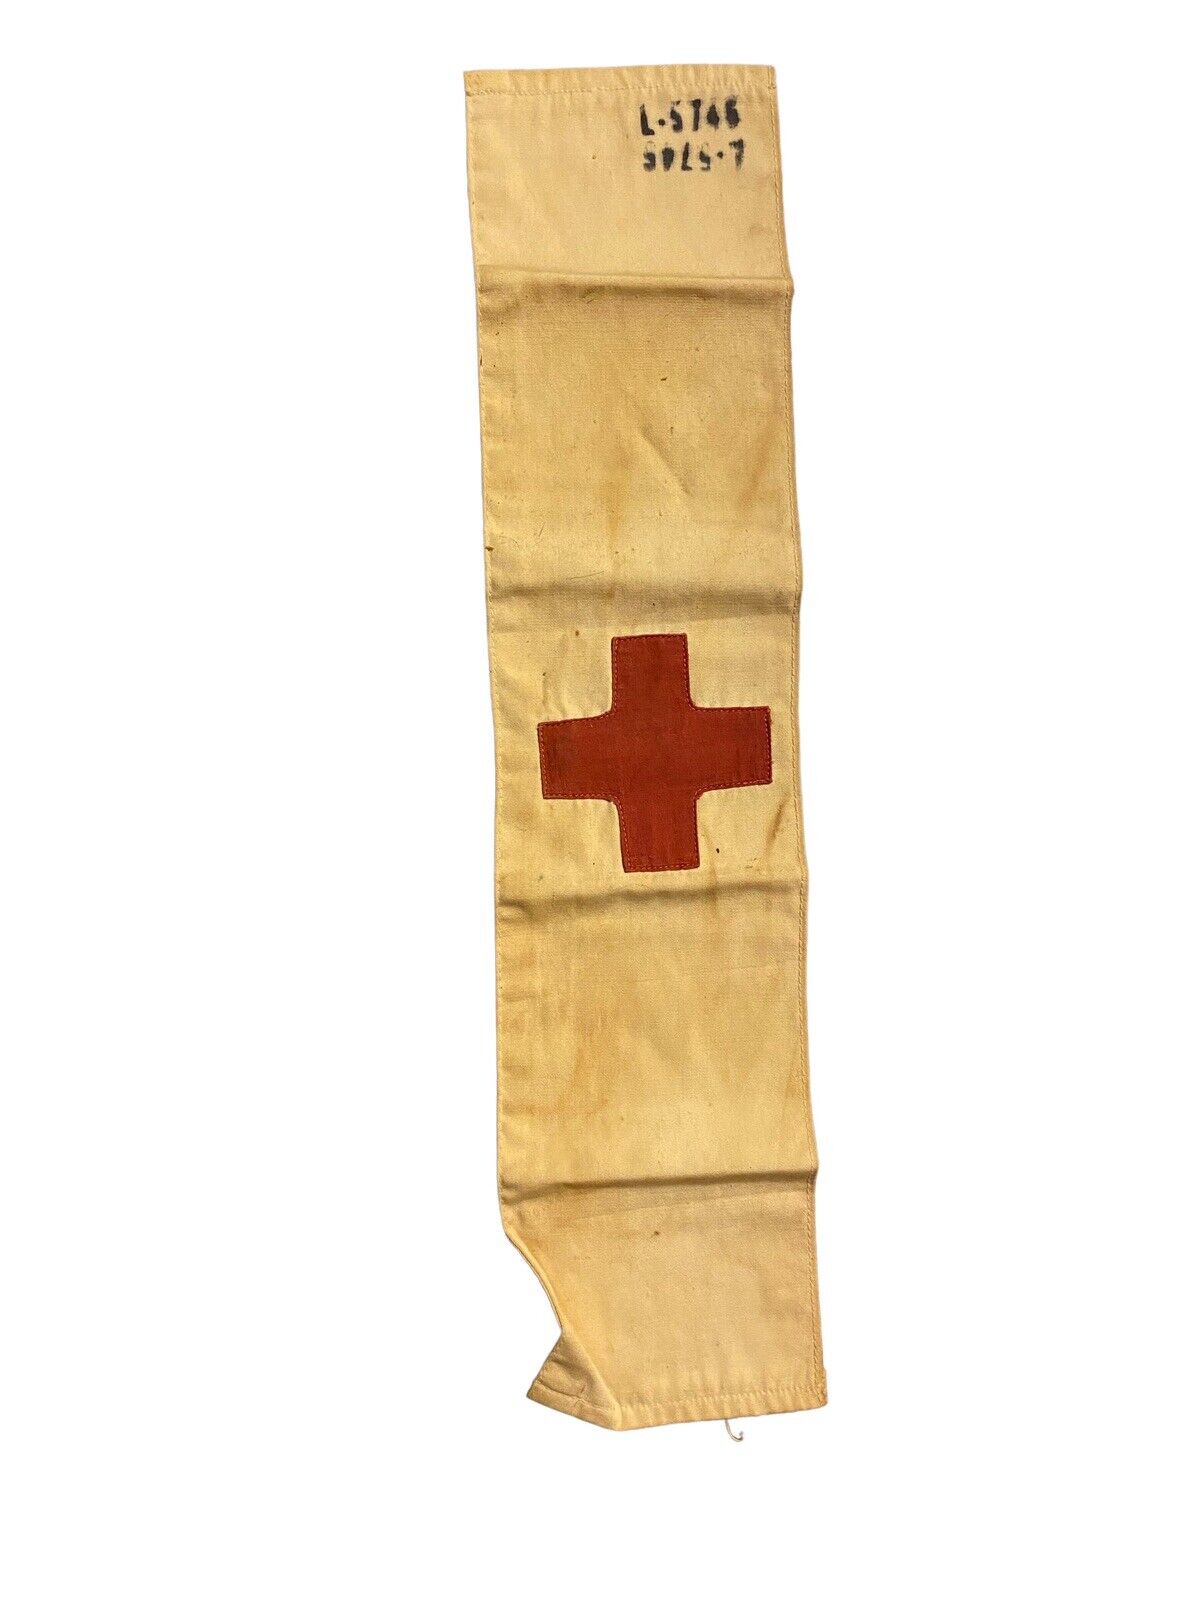 VINTAGE WWII ORIGINAL AEF COMBAT MEDIC ARMY RED CROSS COTTON ARMBAND